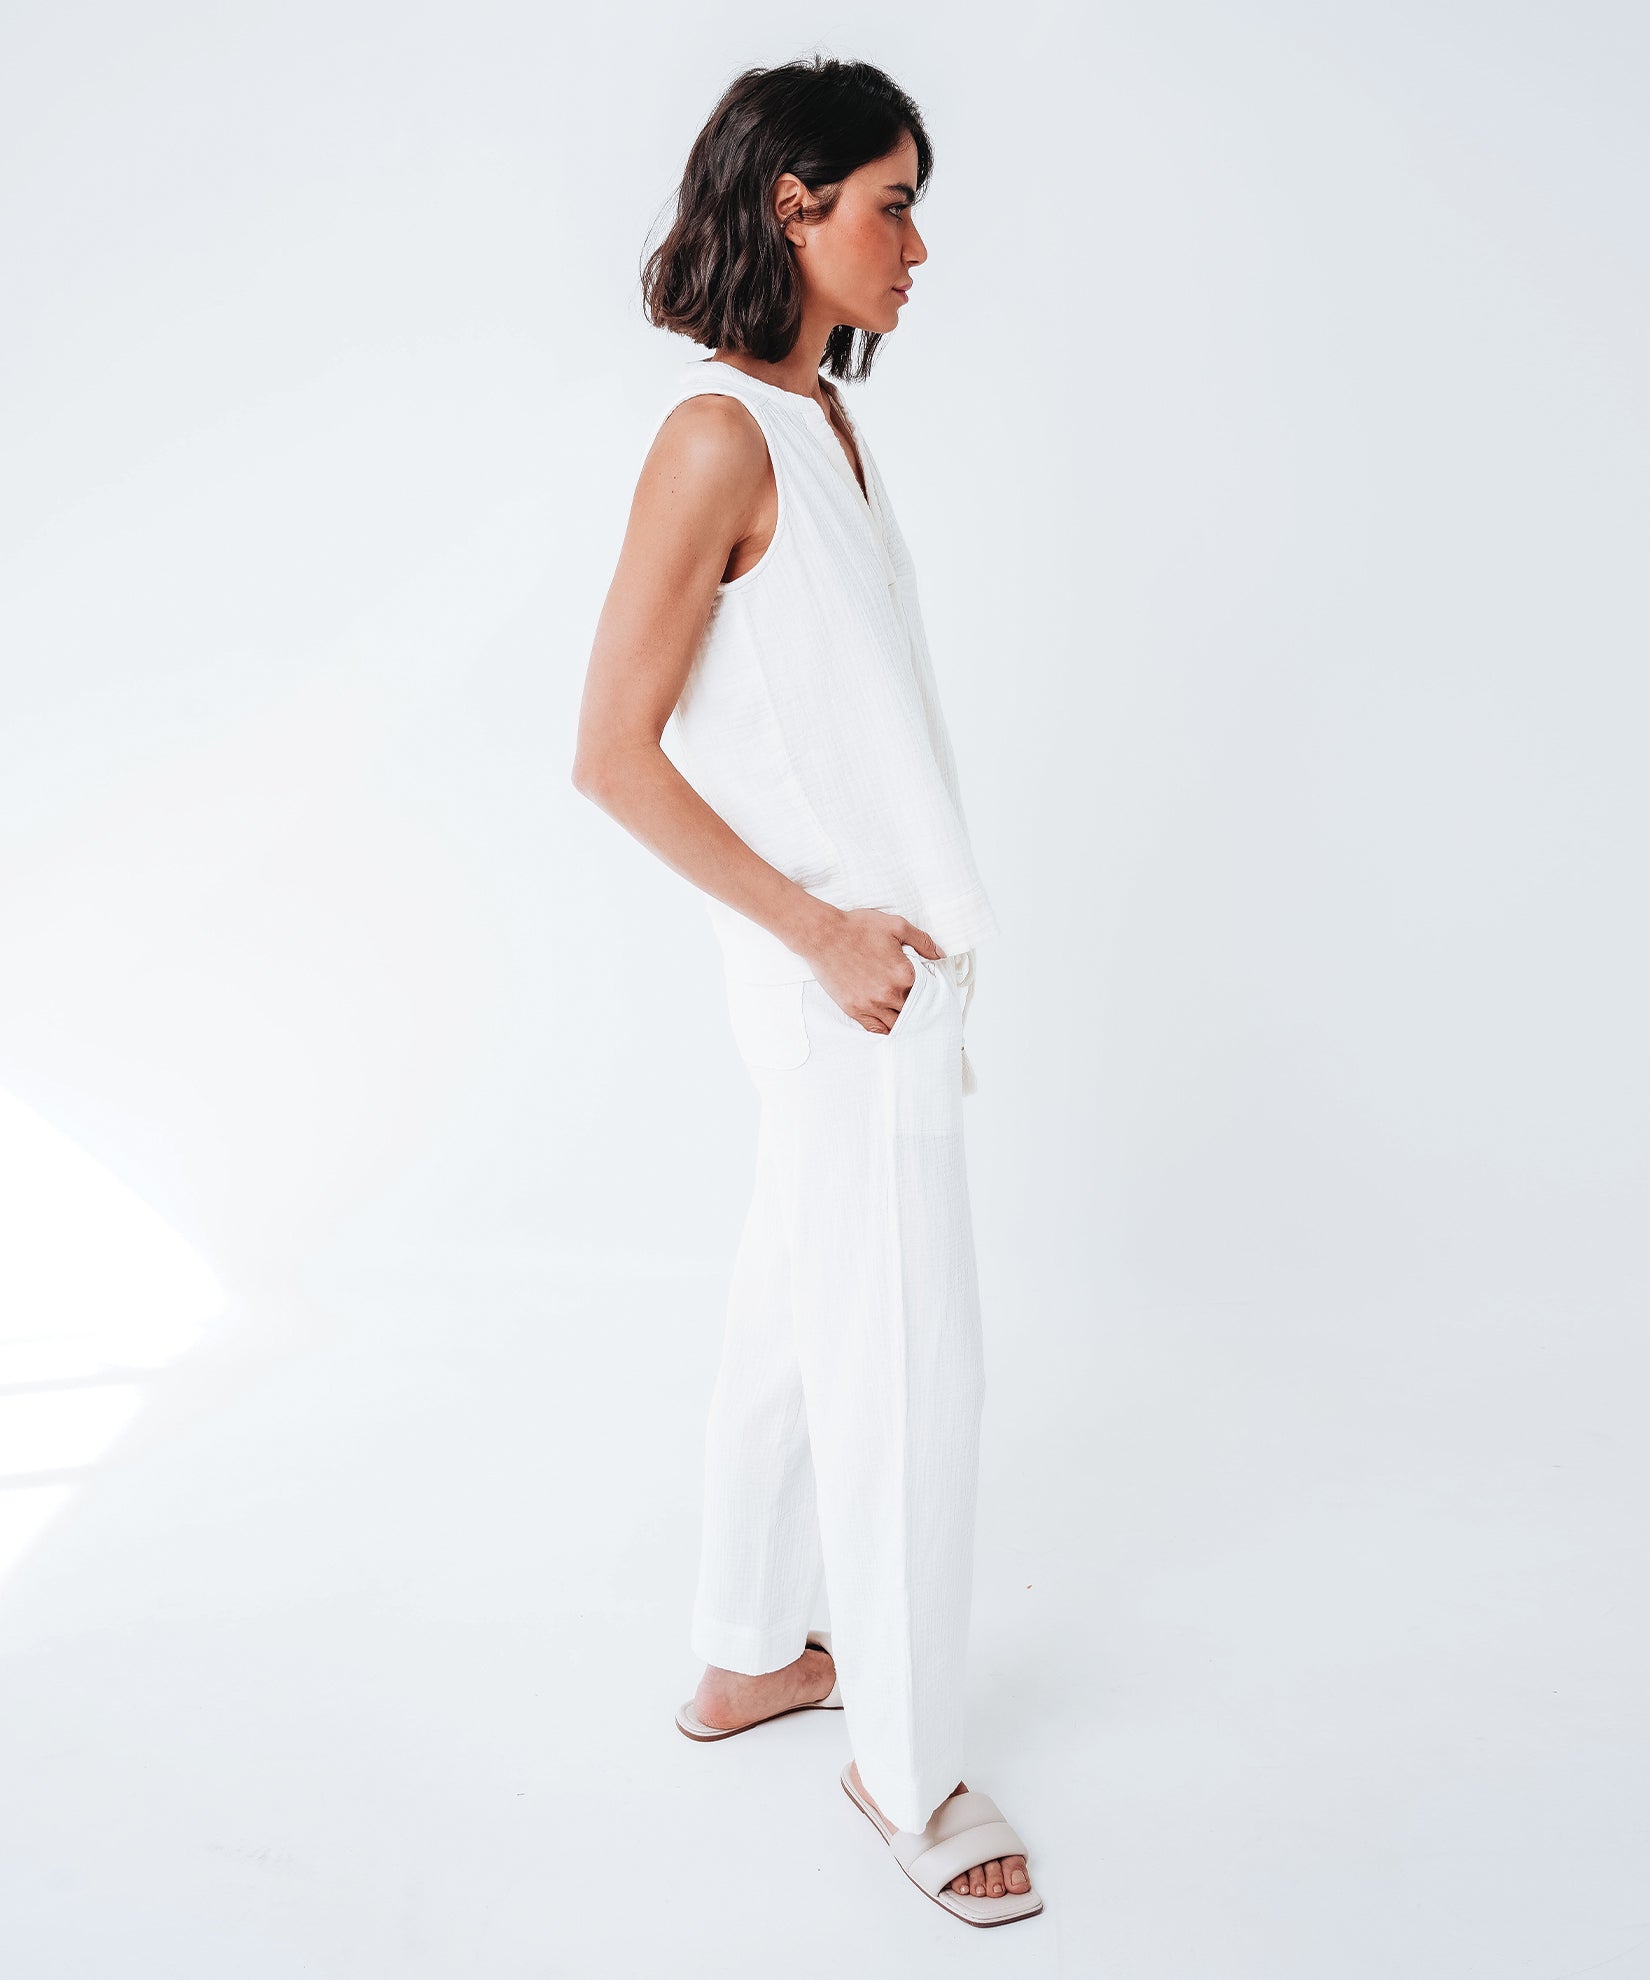 Supersoft Gauze Beach Pant in color Cream on a model